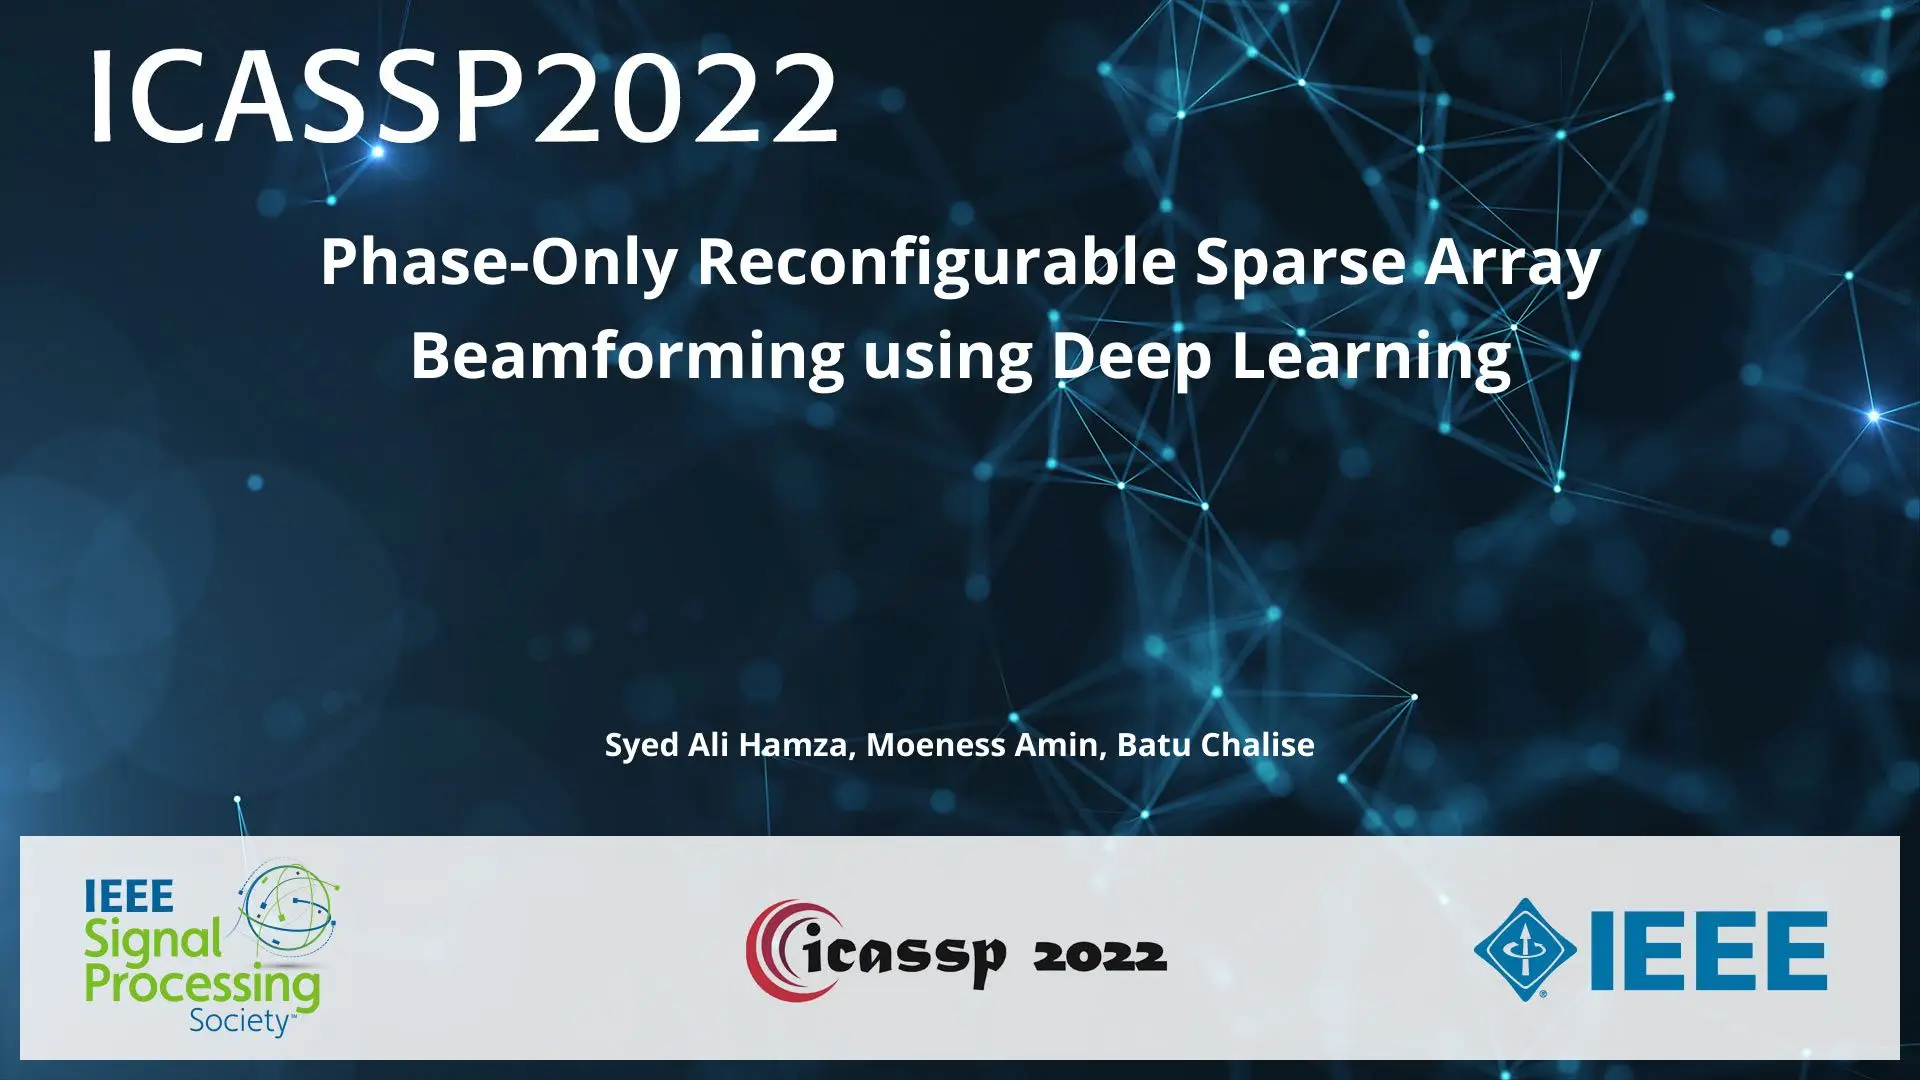 Phase-Only Reconfigurable Sparse Array Beamforming using Deep Learning